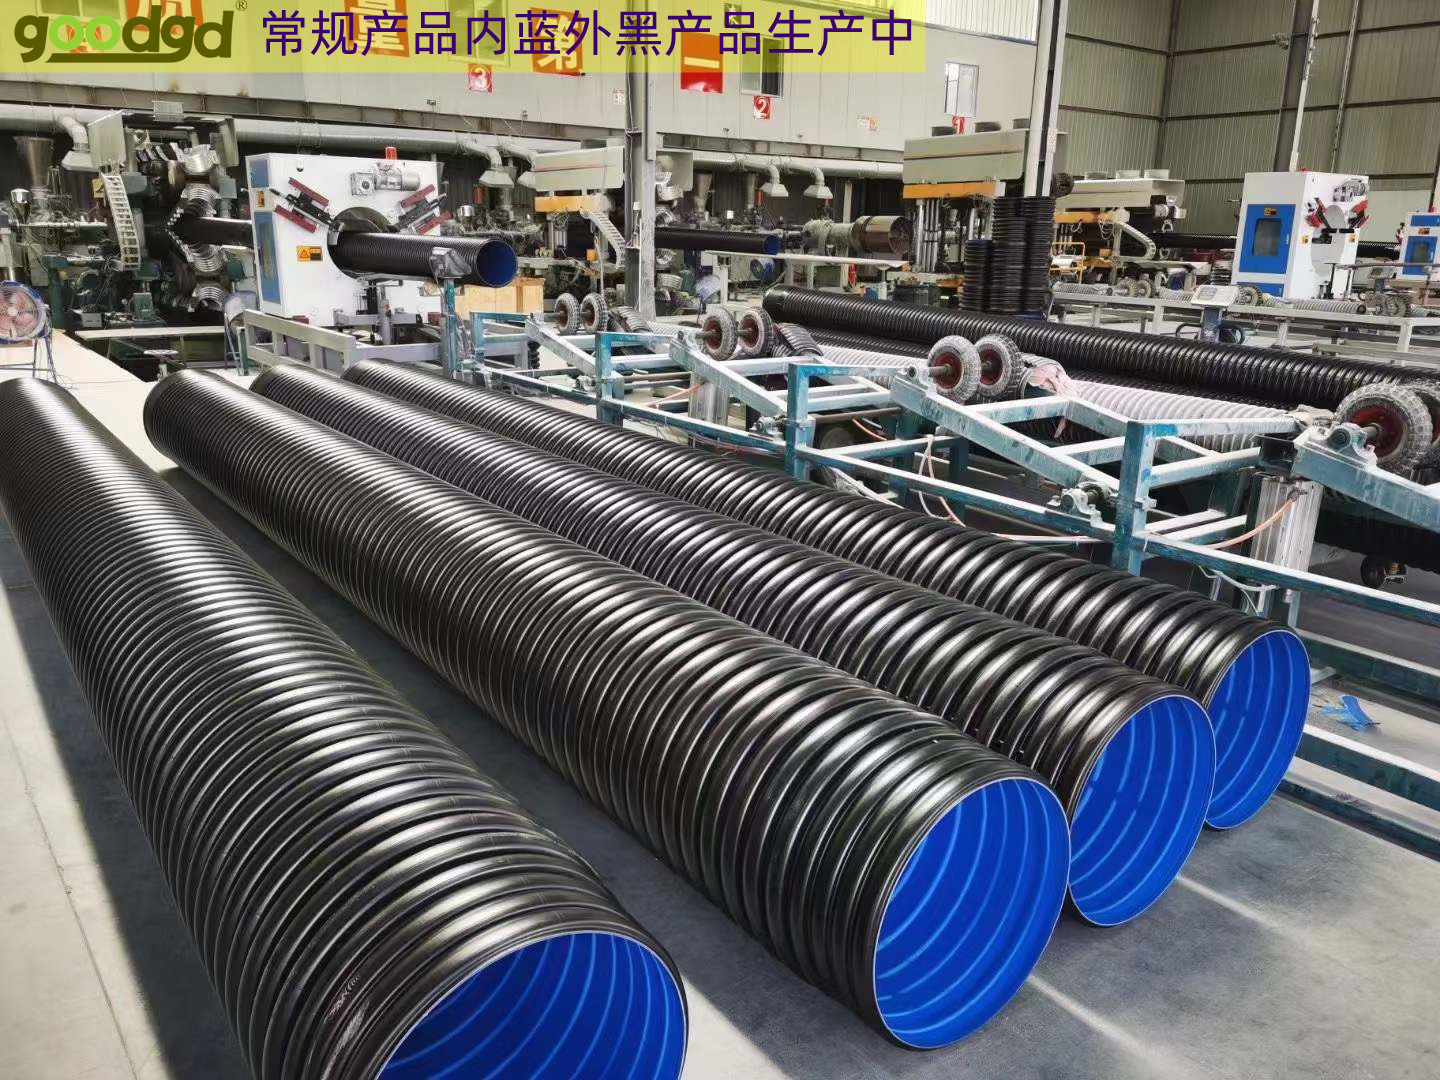 HDPE Double Wall Corrugated Pipe Ground Fixation Technology Large Diameter Drainage Urban Pipe Network Buried Sewage Discharge